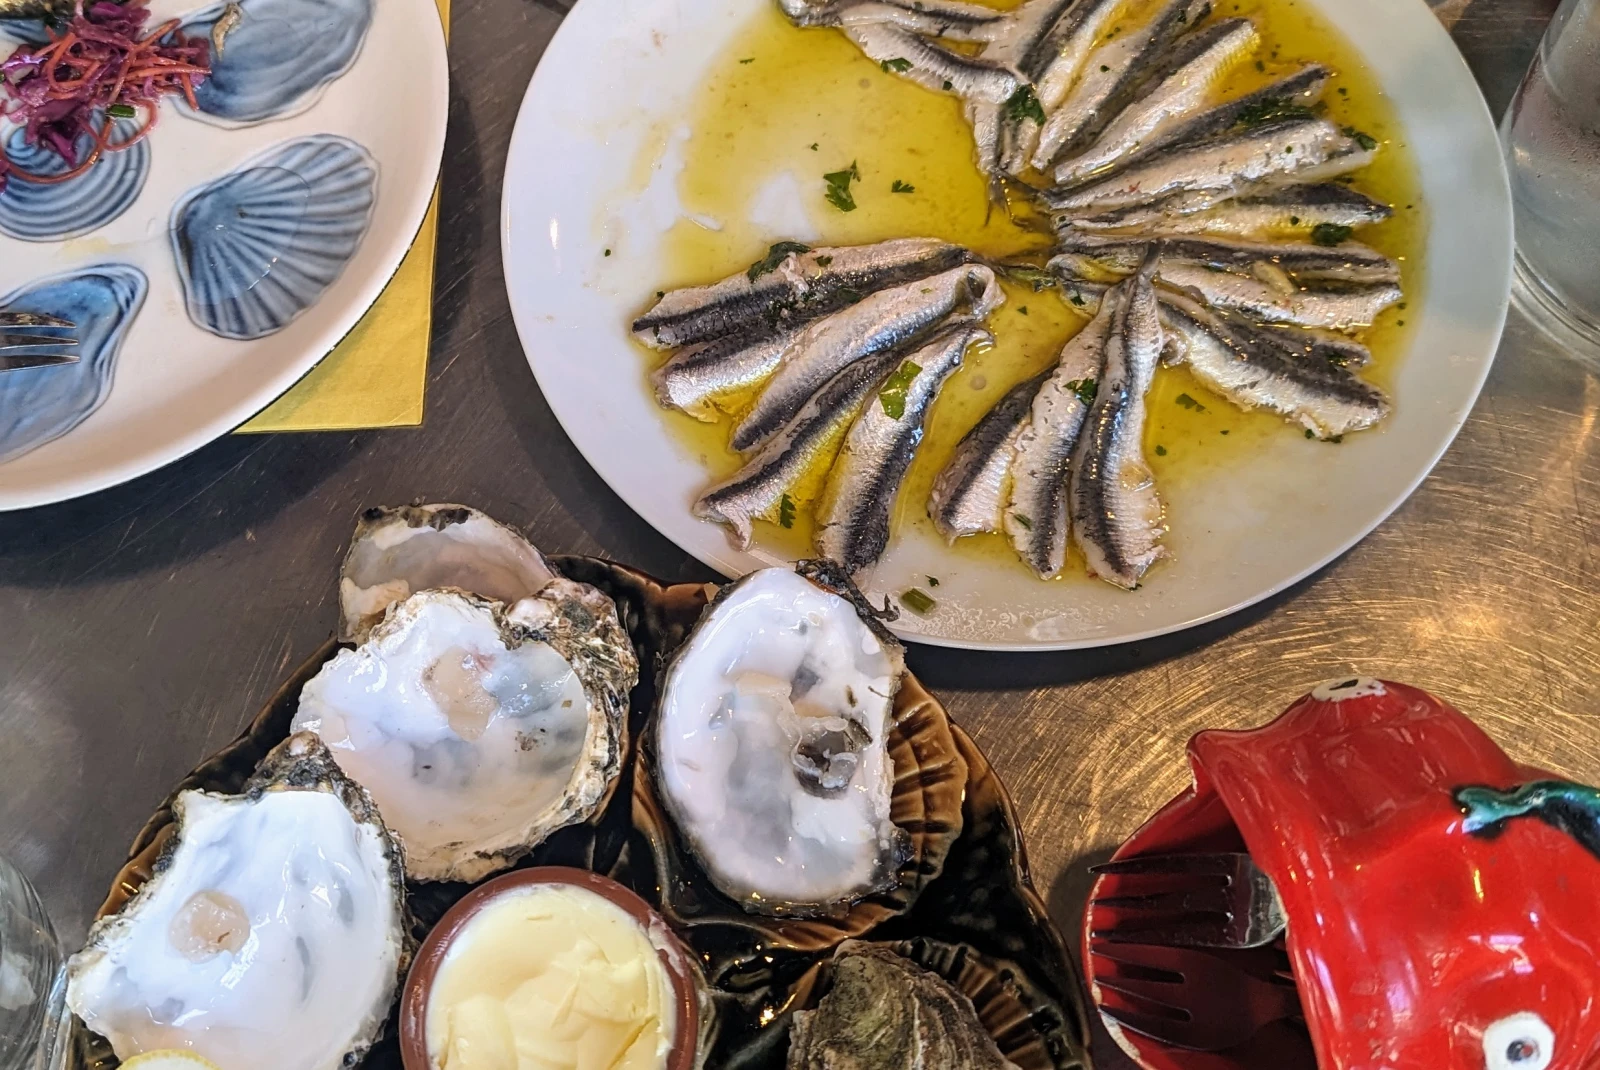 Dishes with oysters and other fish. 